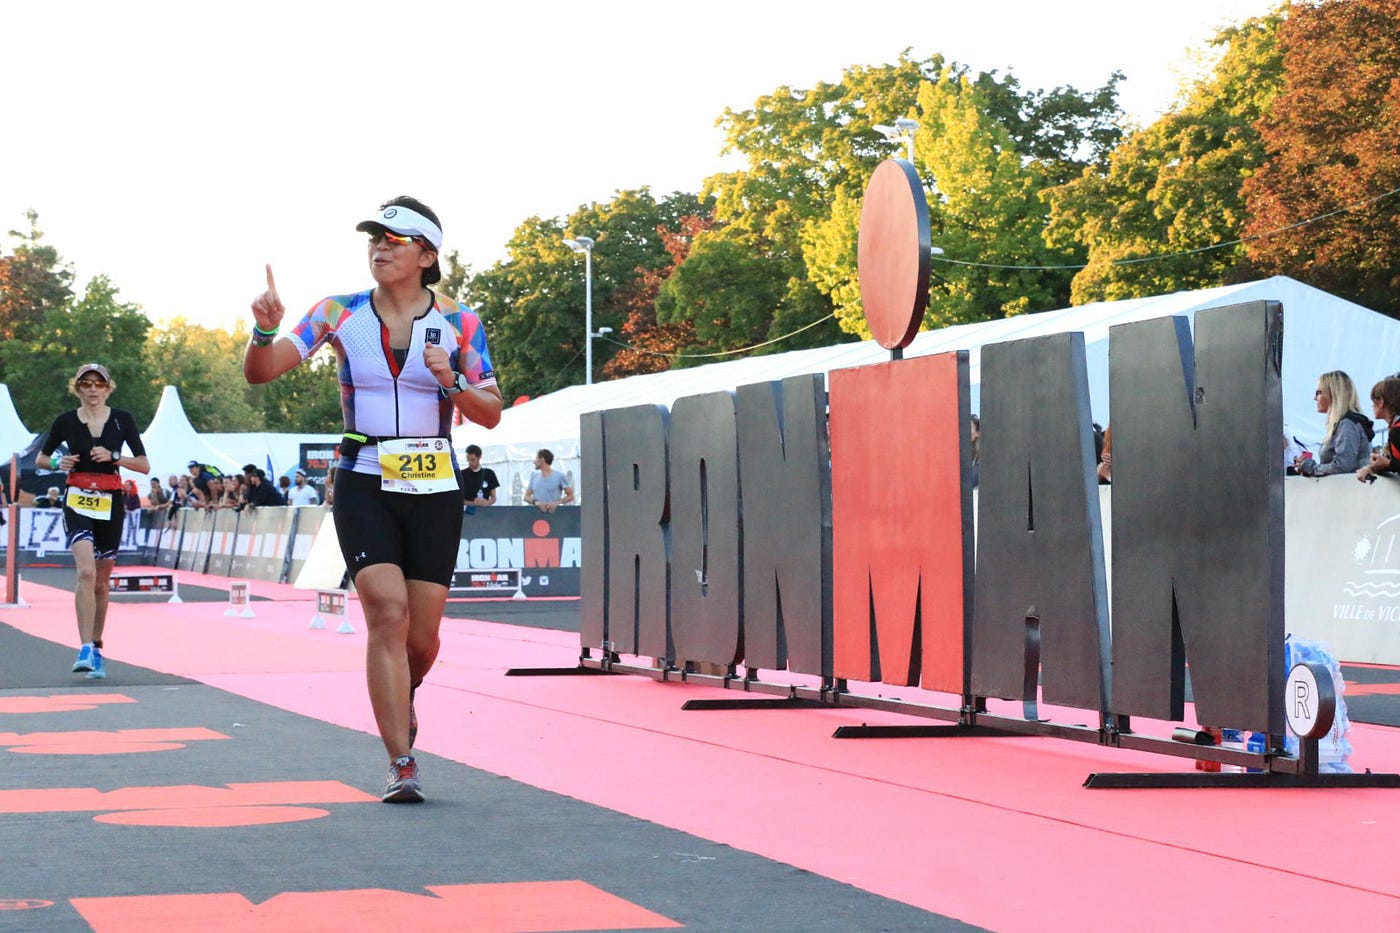 Ironman Vichy 2018 Race Report. I finished! | by Christine Luo | Medium